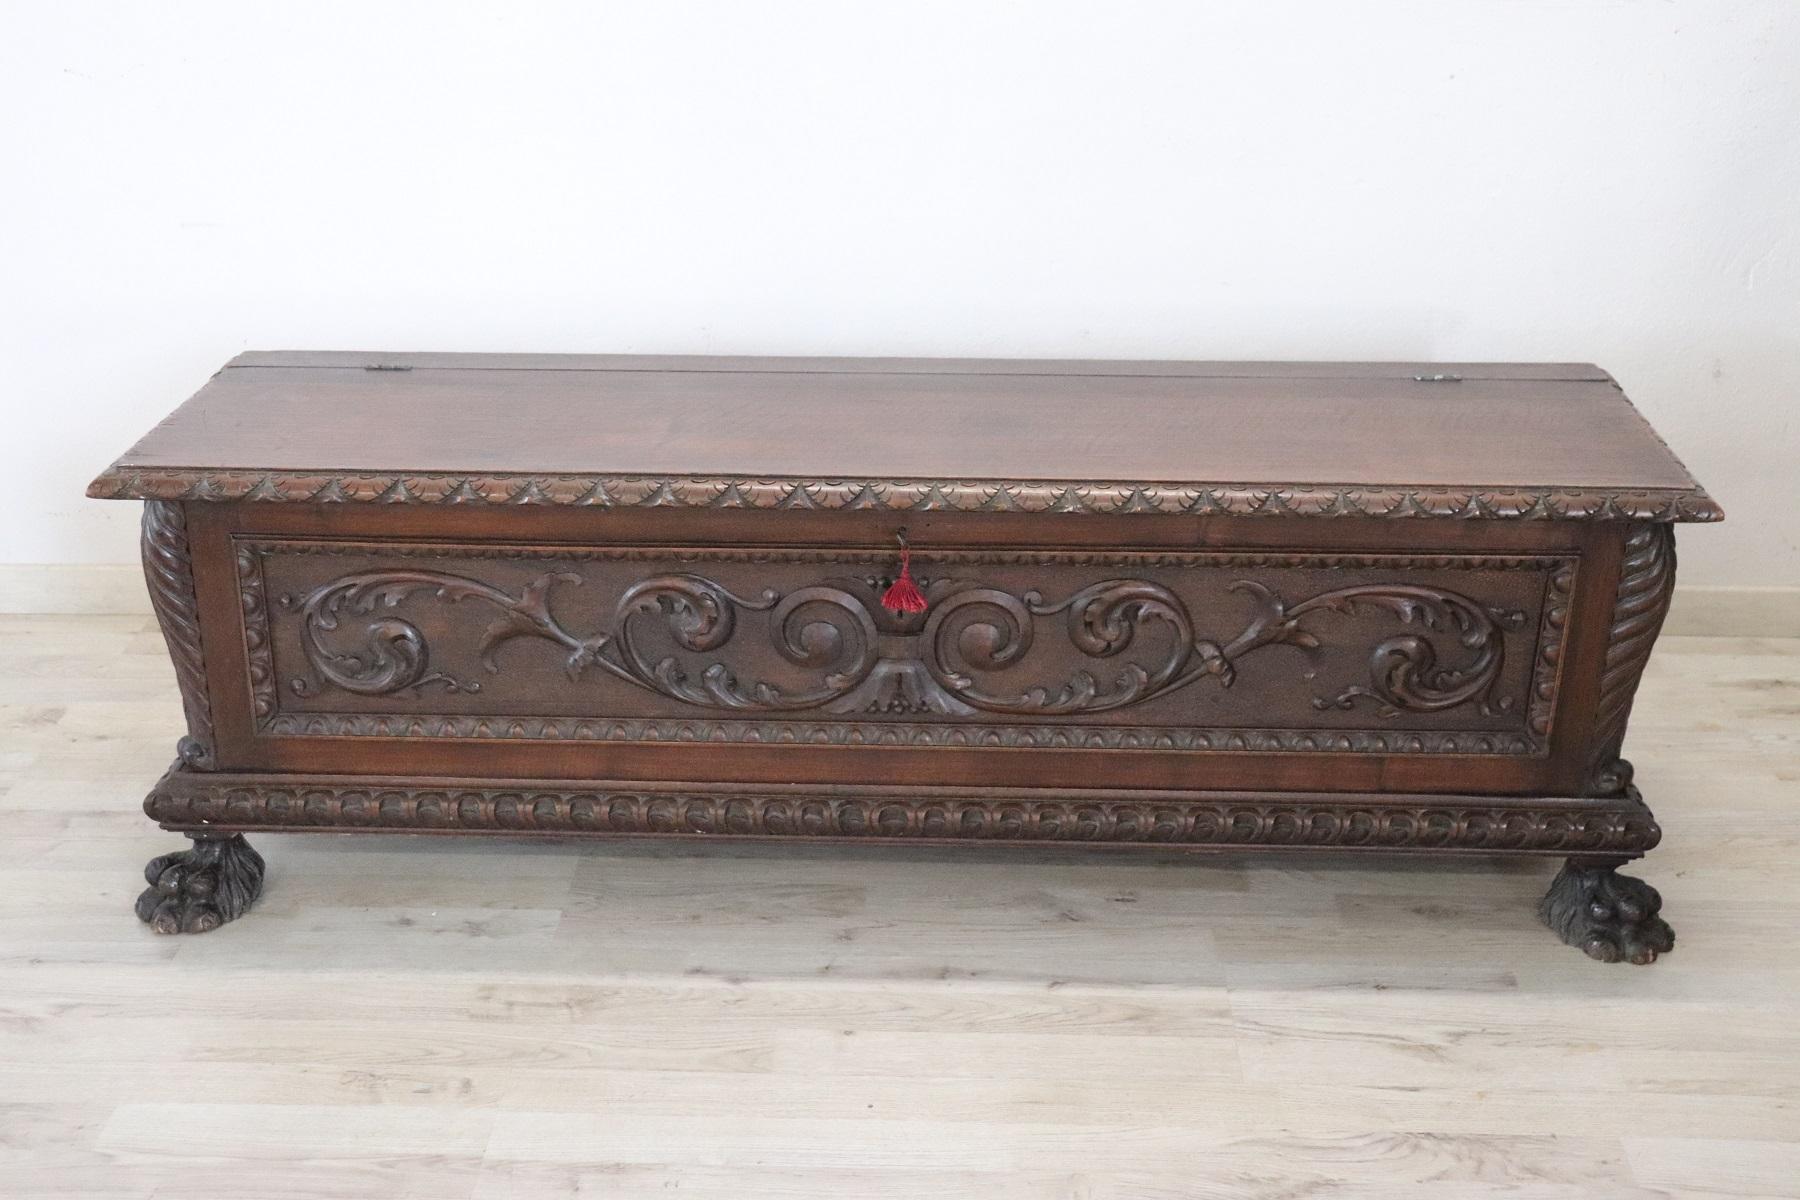 Beautiful blanket chest in solid walnut. Featuring great wood carving work and large paw feet. The antique blanket chest also completely original and has great charm. In antique perfect conditions.
 